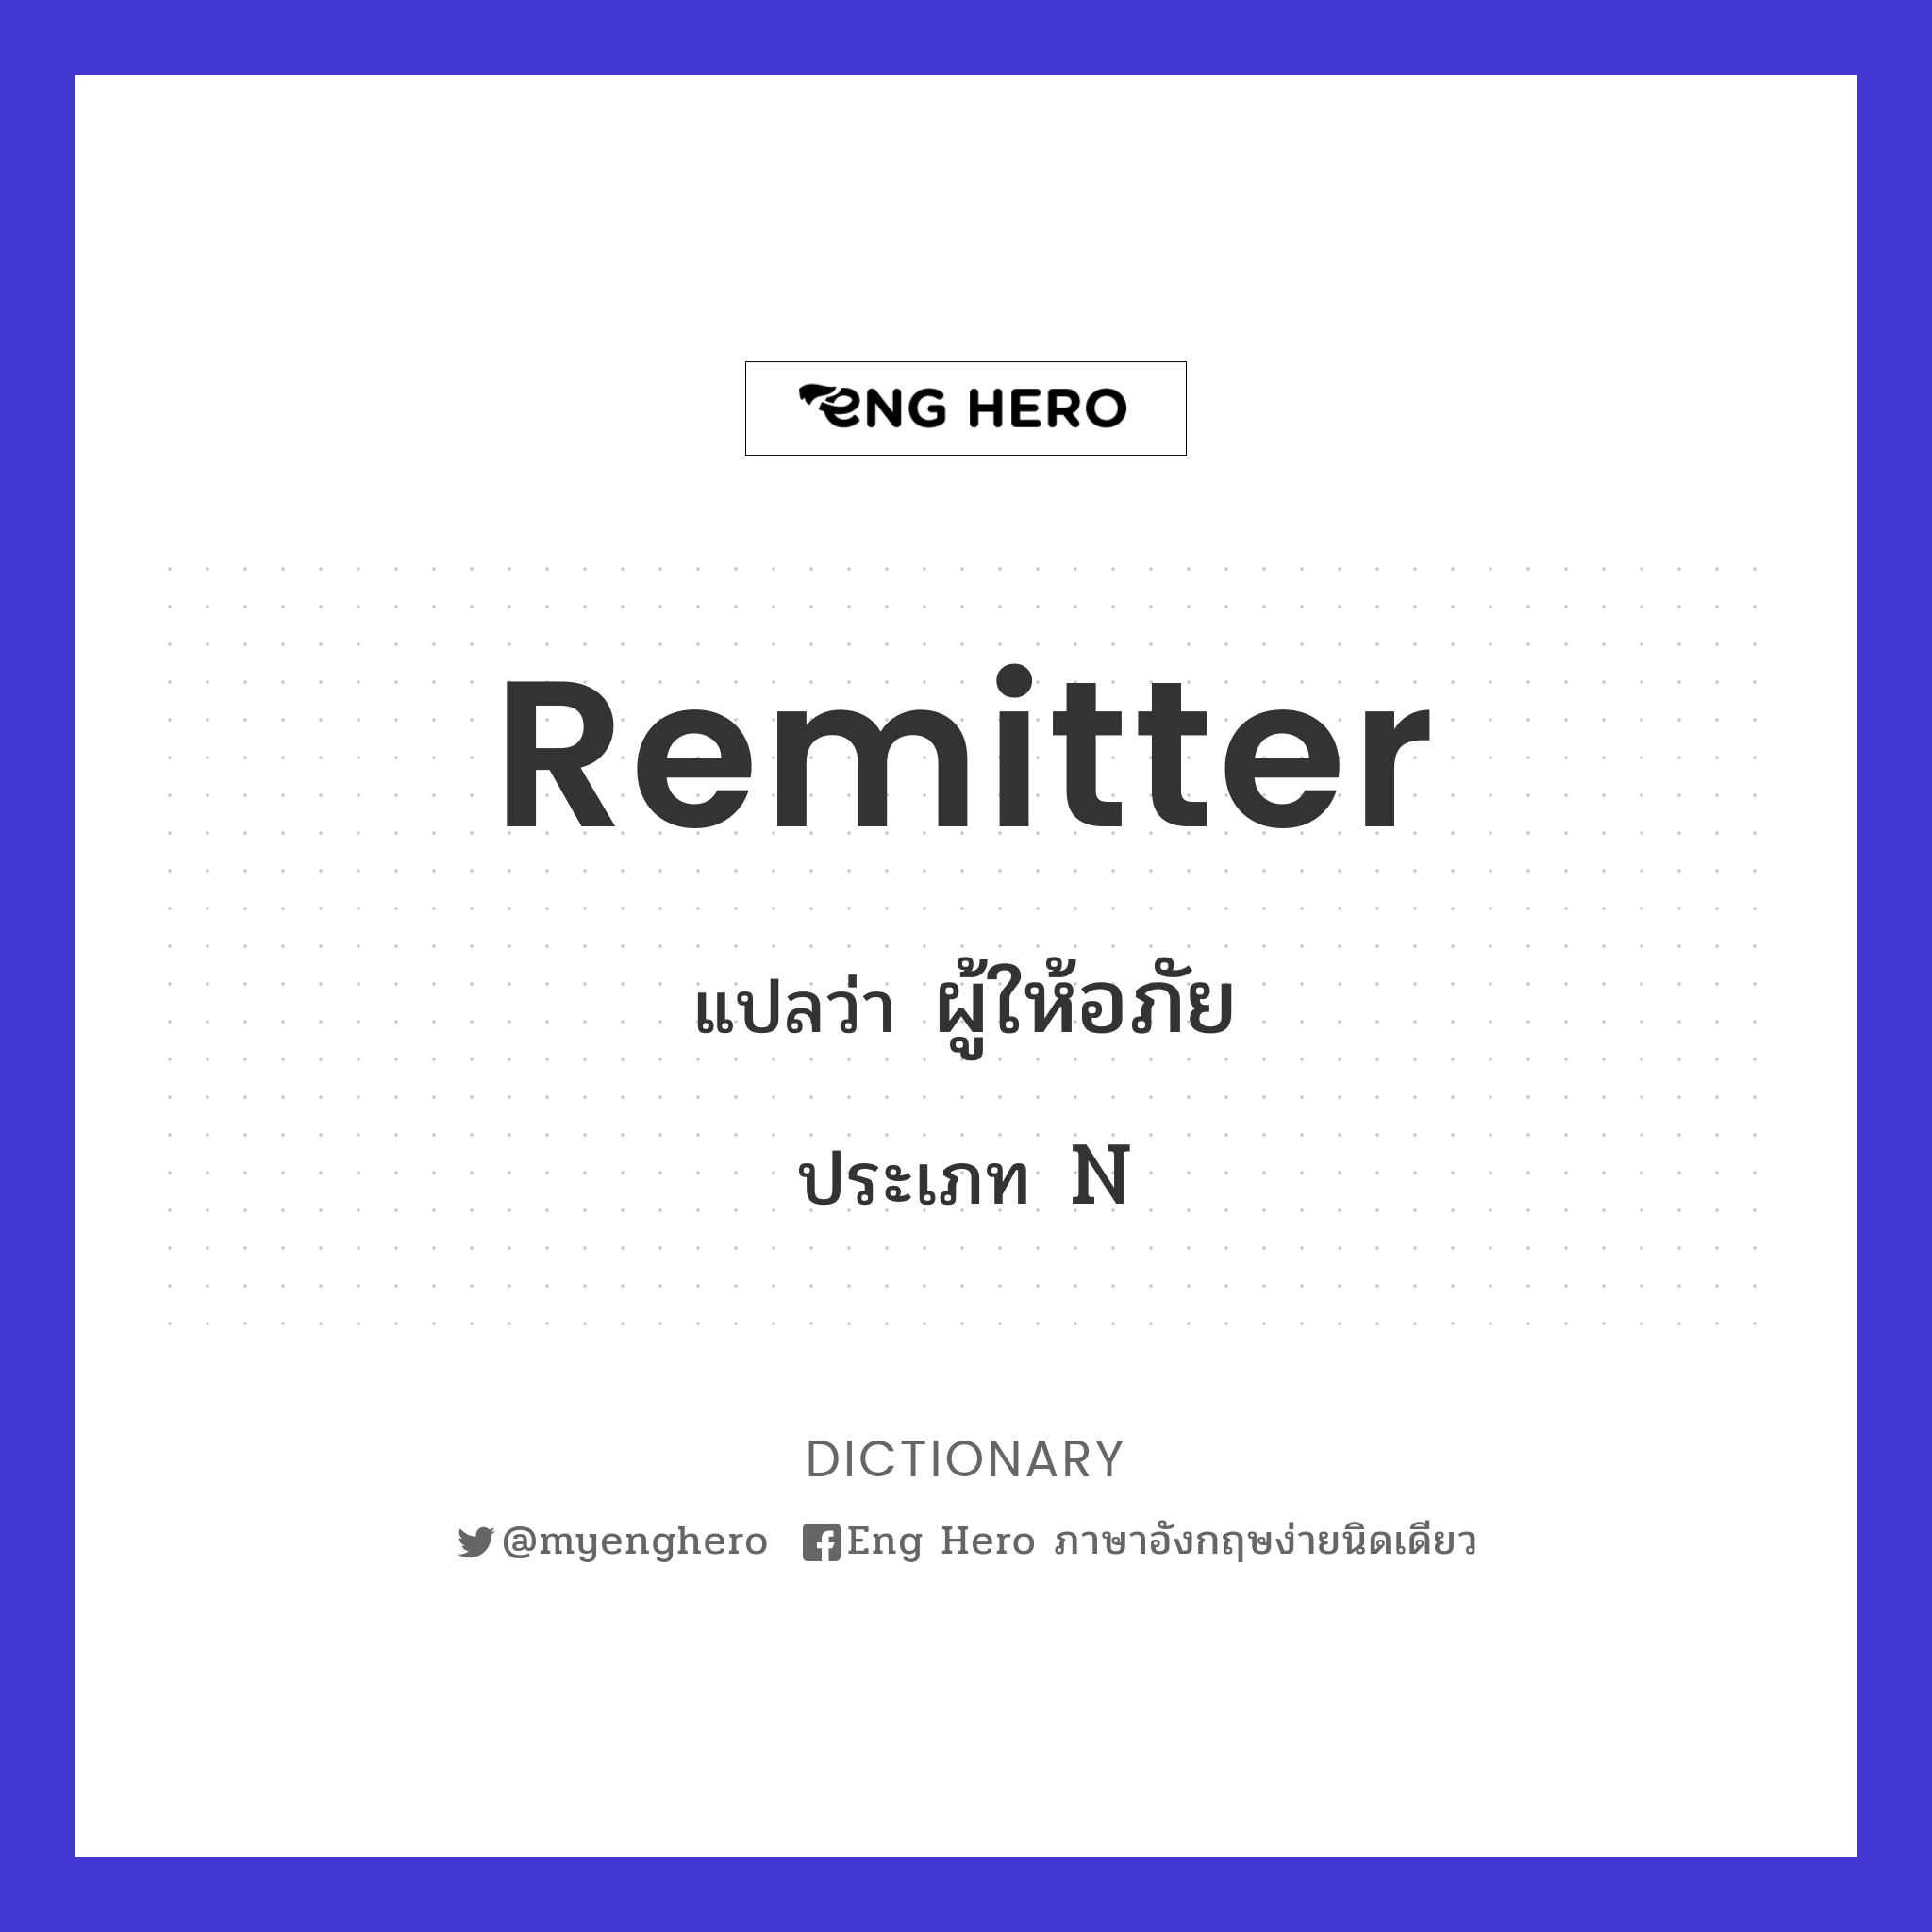 remitter